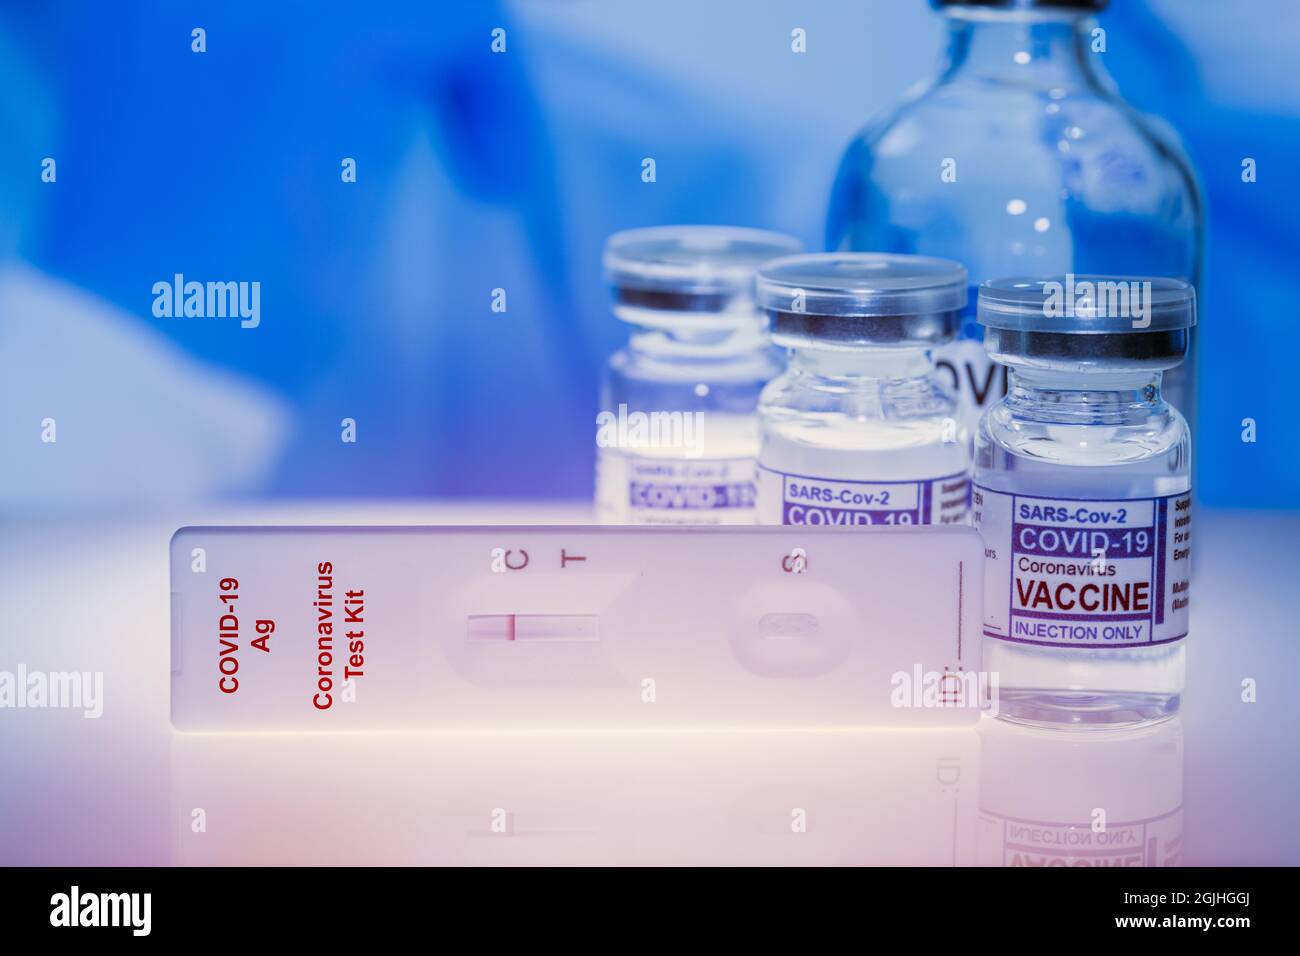 Covid-19 Self Rapid Antigen Test Kit with Covid Vaccine dose bottle for Coronavirus detect and treatment. Stock Photo